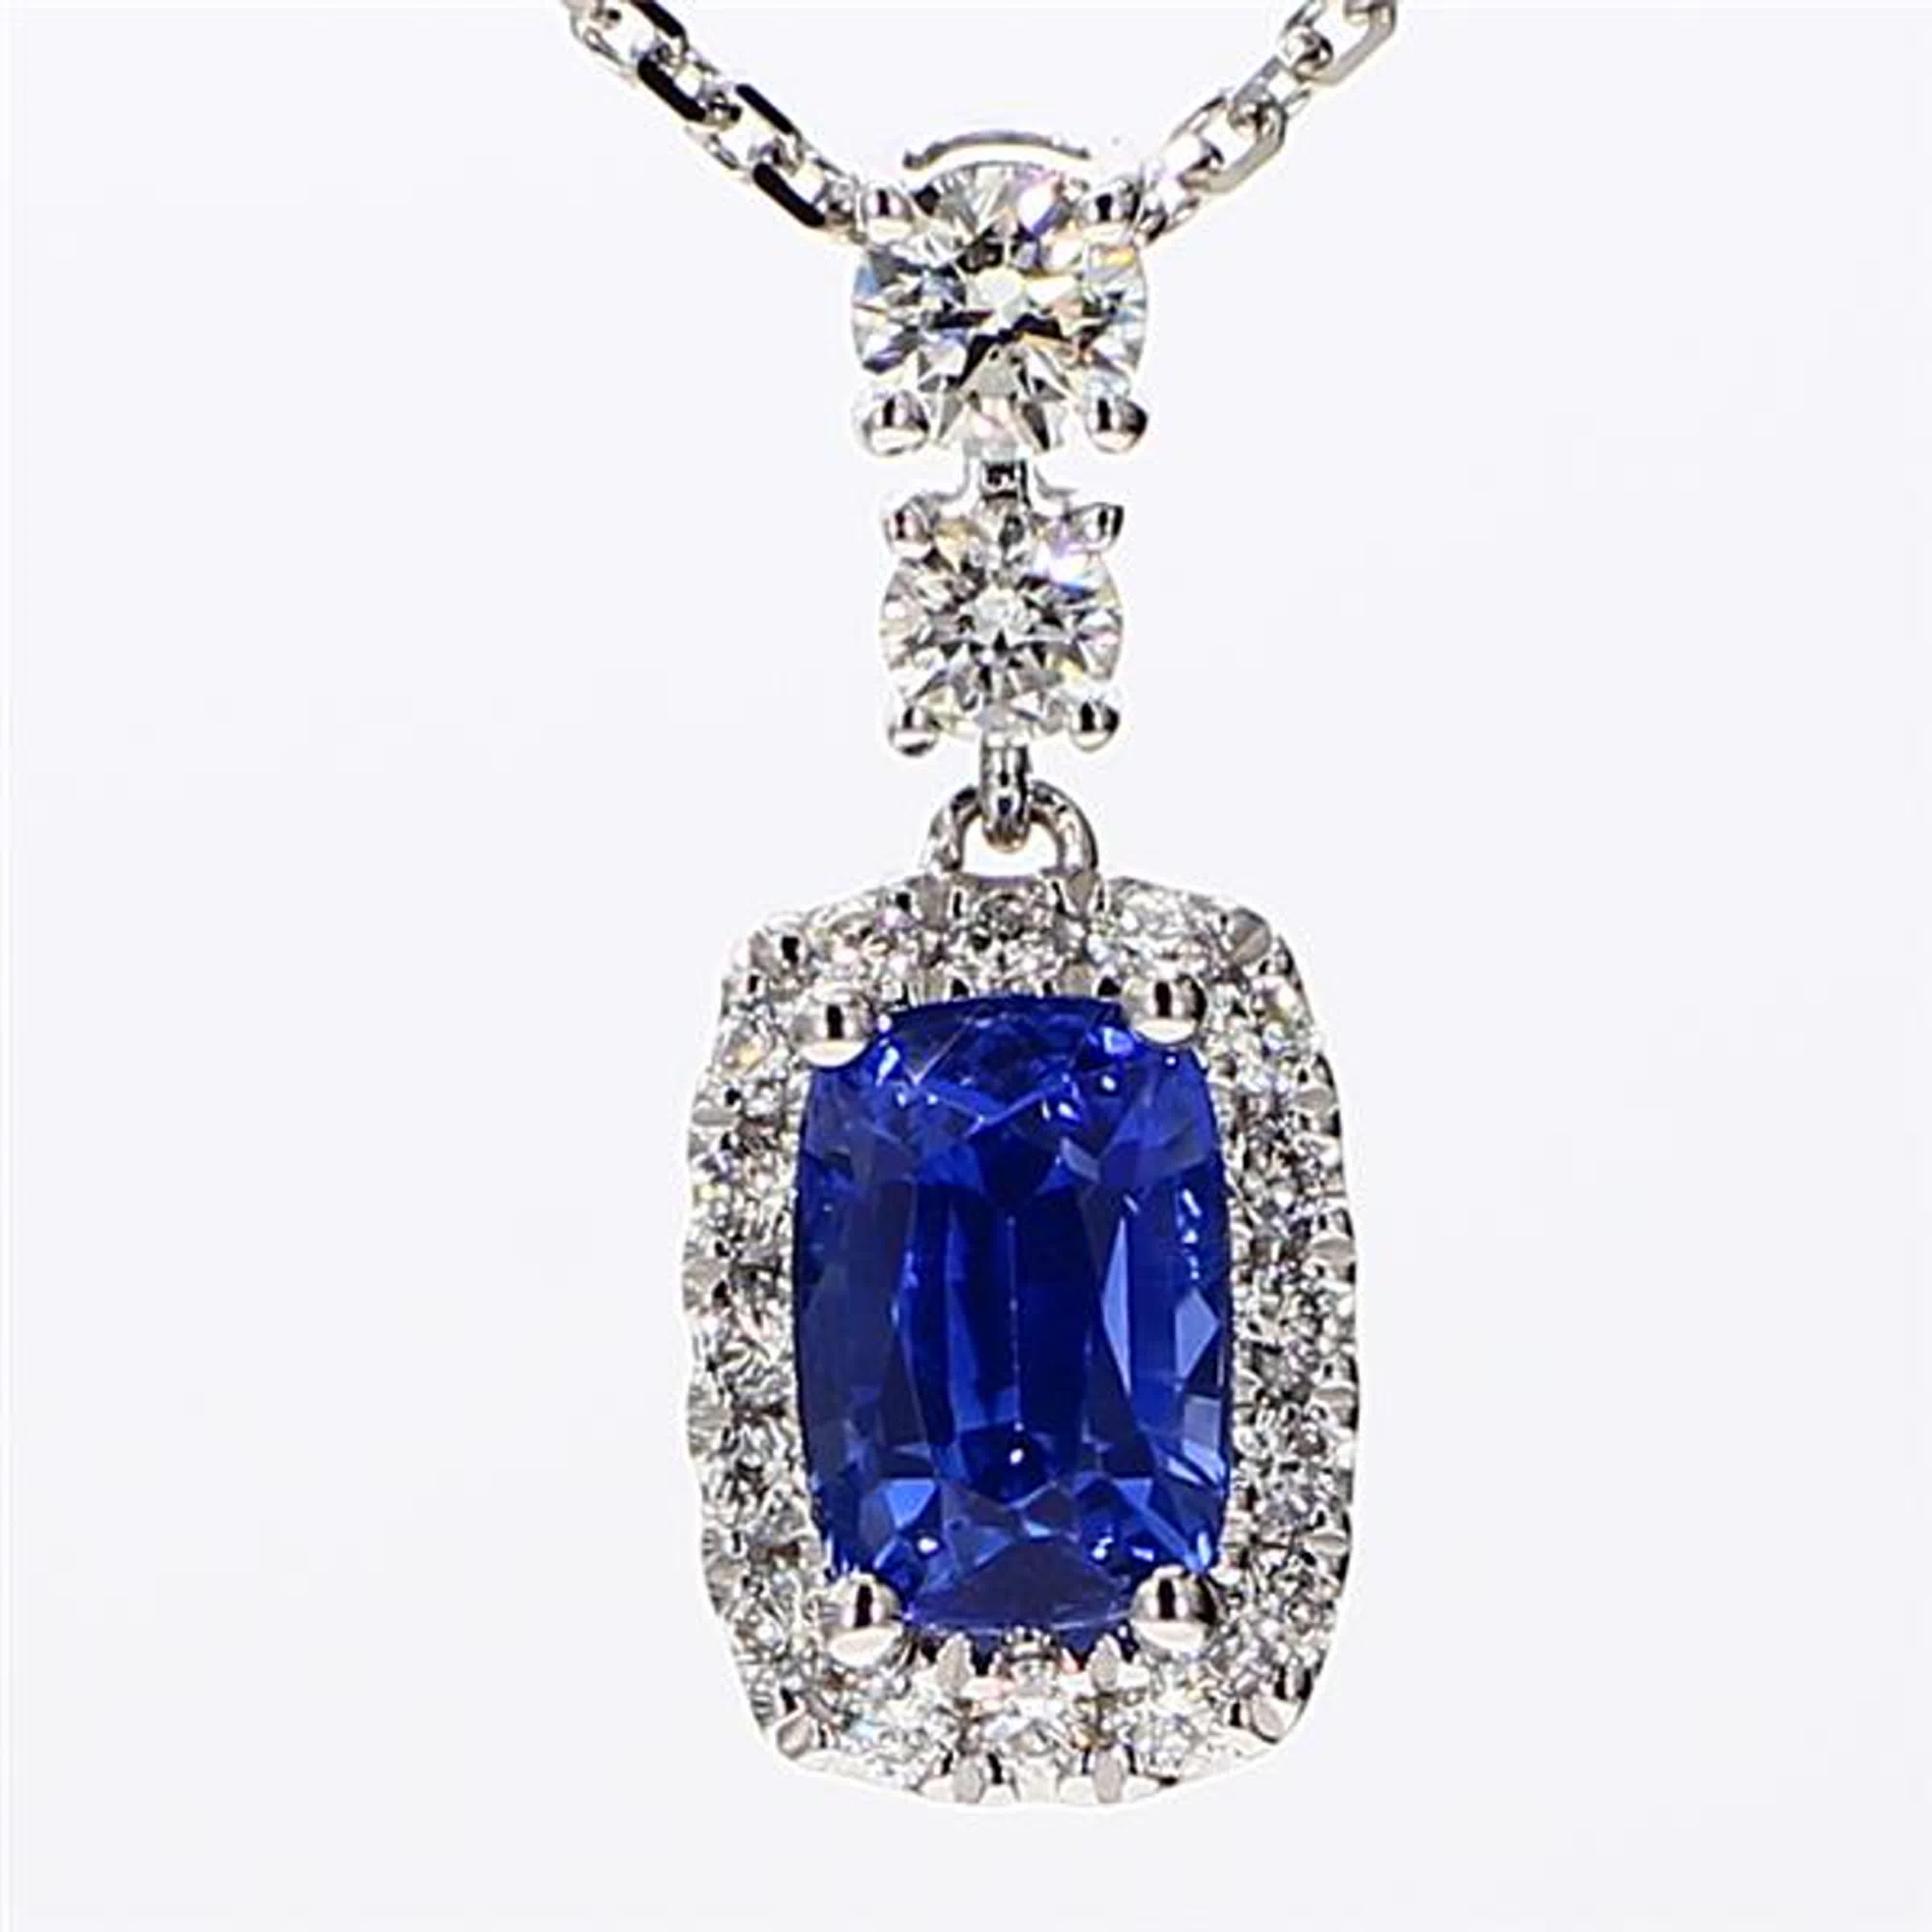 RareGemWorld's classic sapphire pendant. Mounted in a beautiful 18K White Gold setting with a natural cushion cut blue sapphire. The sapphire is surrounded by natural round white diamond melee. This pendant is guaranteed to impress and enhance your